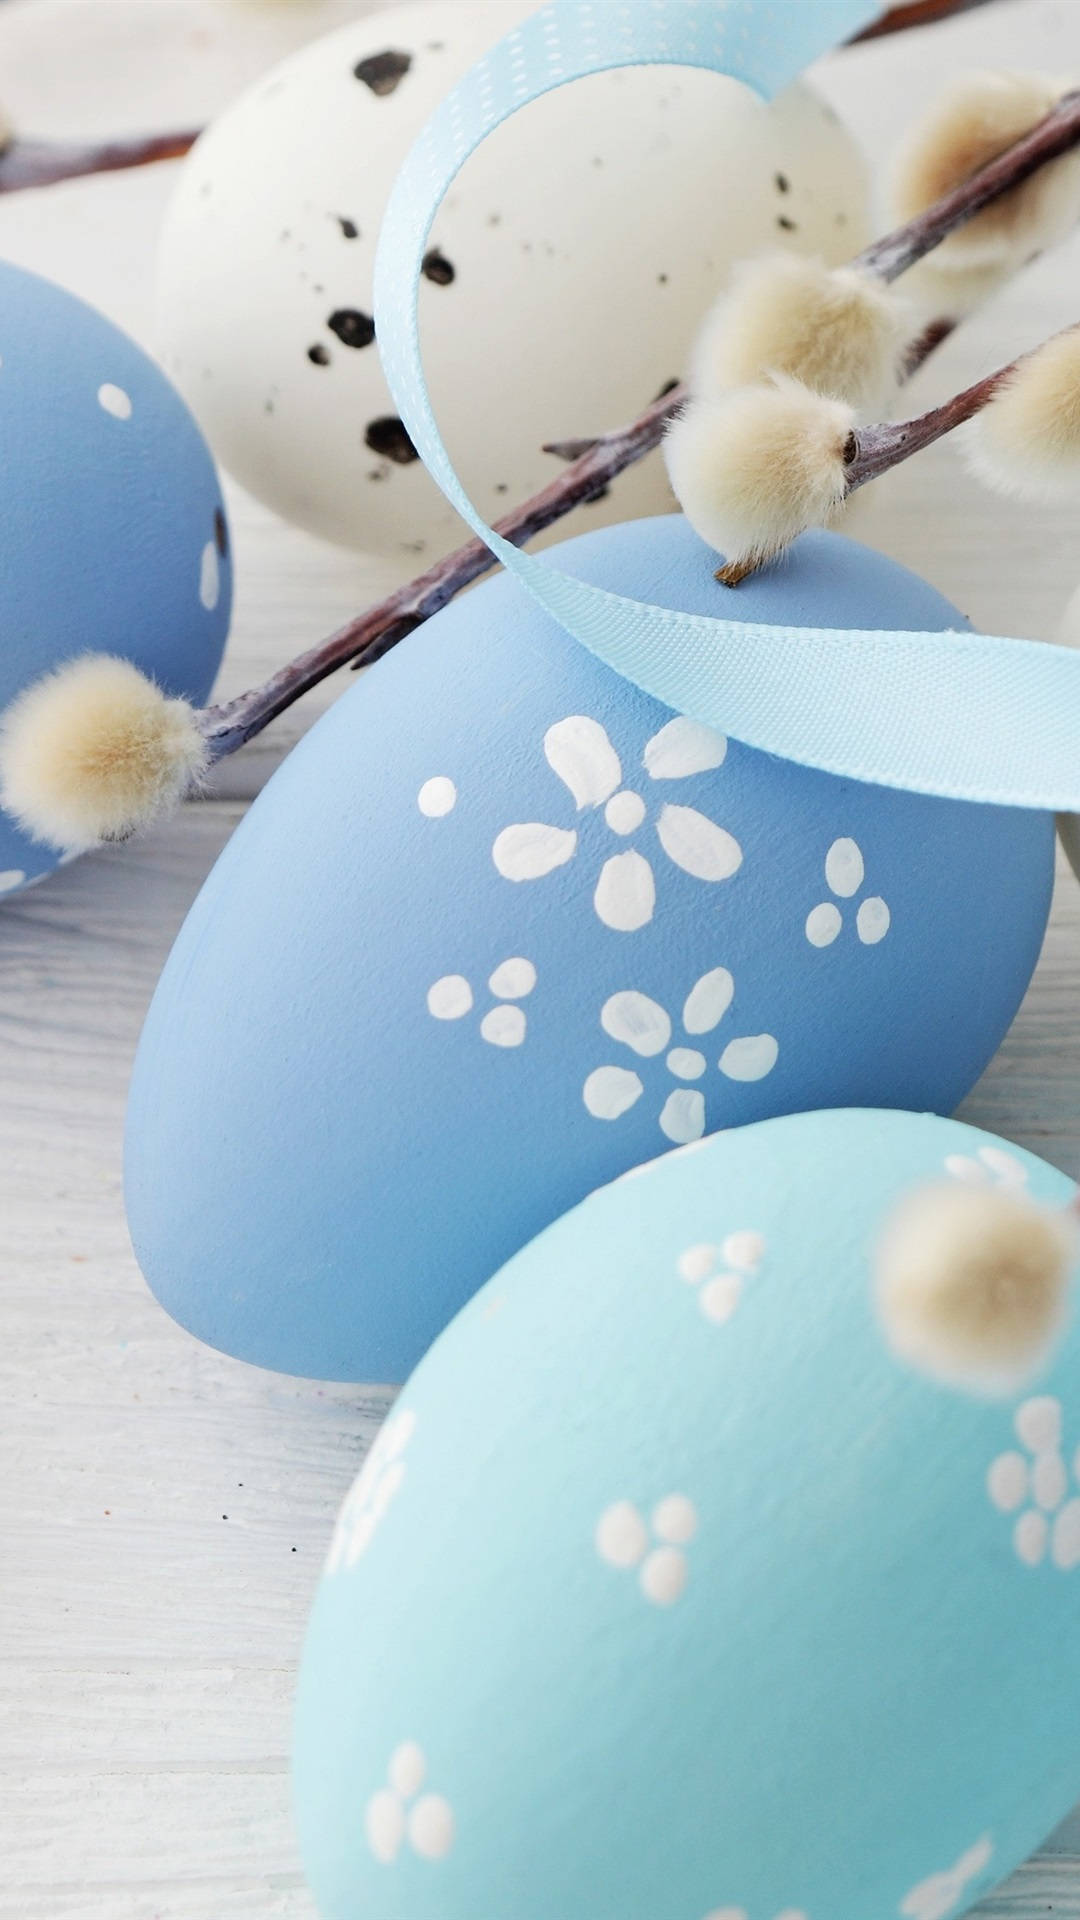 Easter Eggs With Blue And White Decorations Background